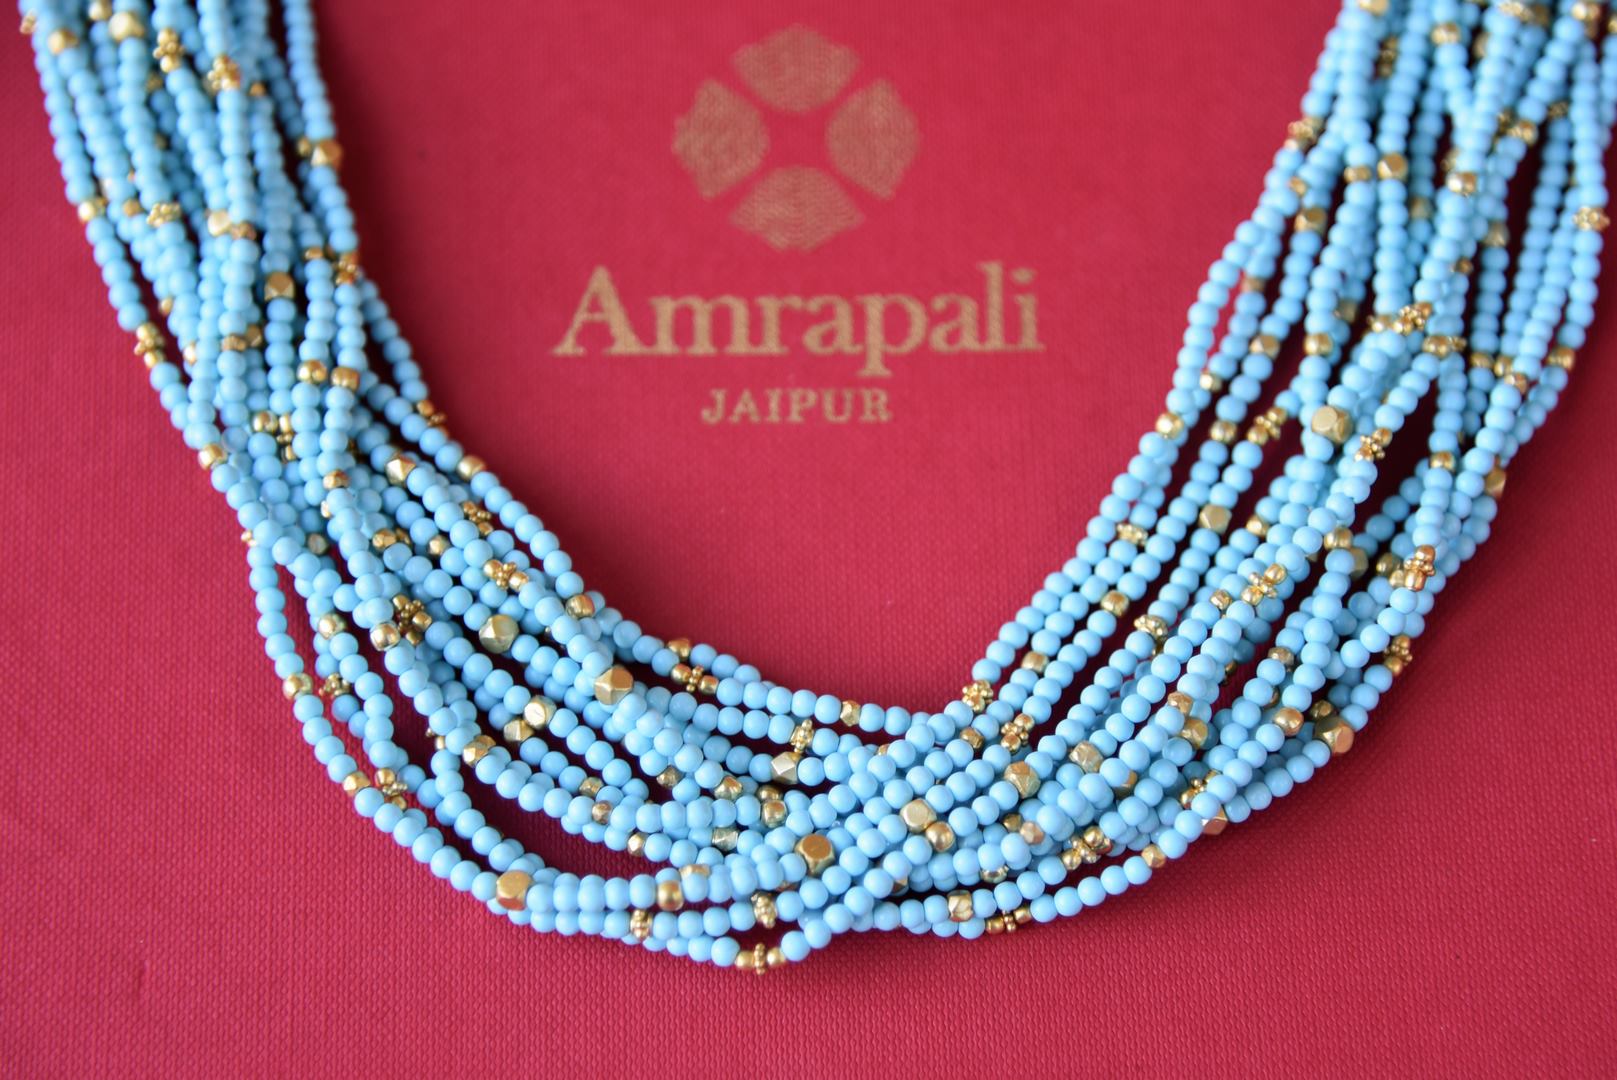 Buy Amrapali silver gold plated turquoise beads multi strings necklace online in USA. Add spark to your ethnic attires with beautiful Indian silver gold plated jewelry, wedding jewellery, silver necklaces from Pure Elegance Indian fashion store in USA.-front